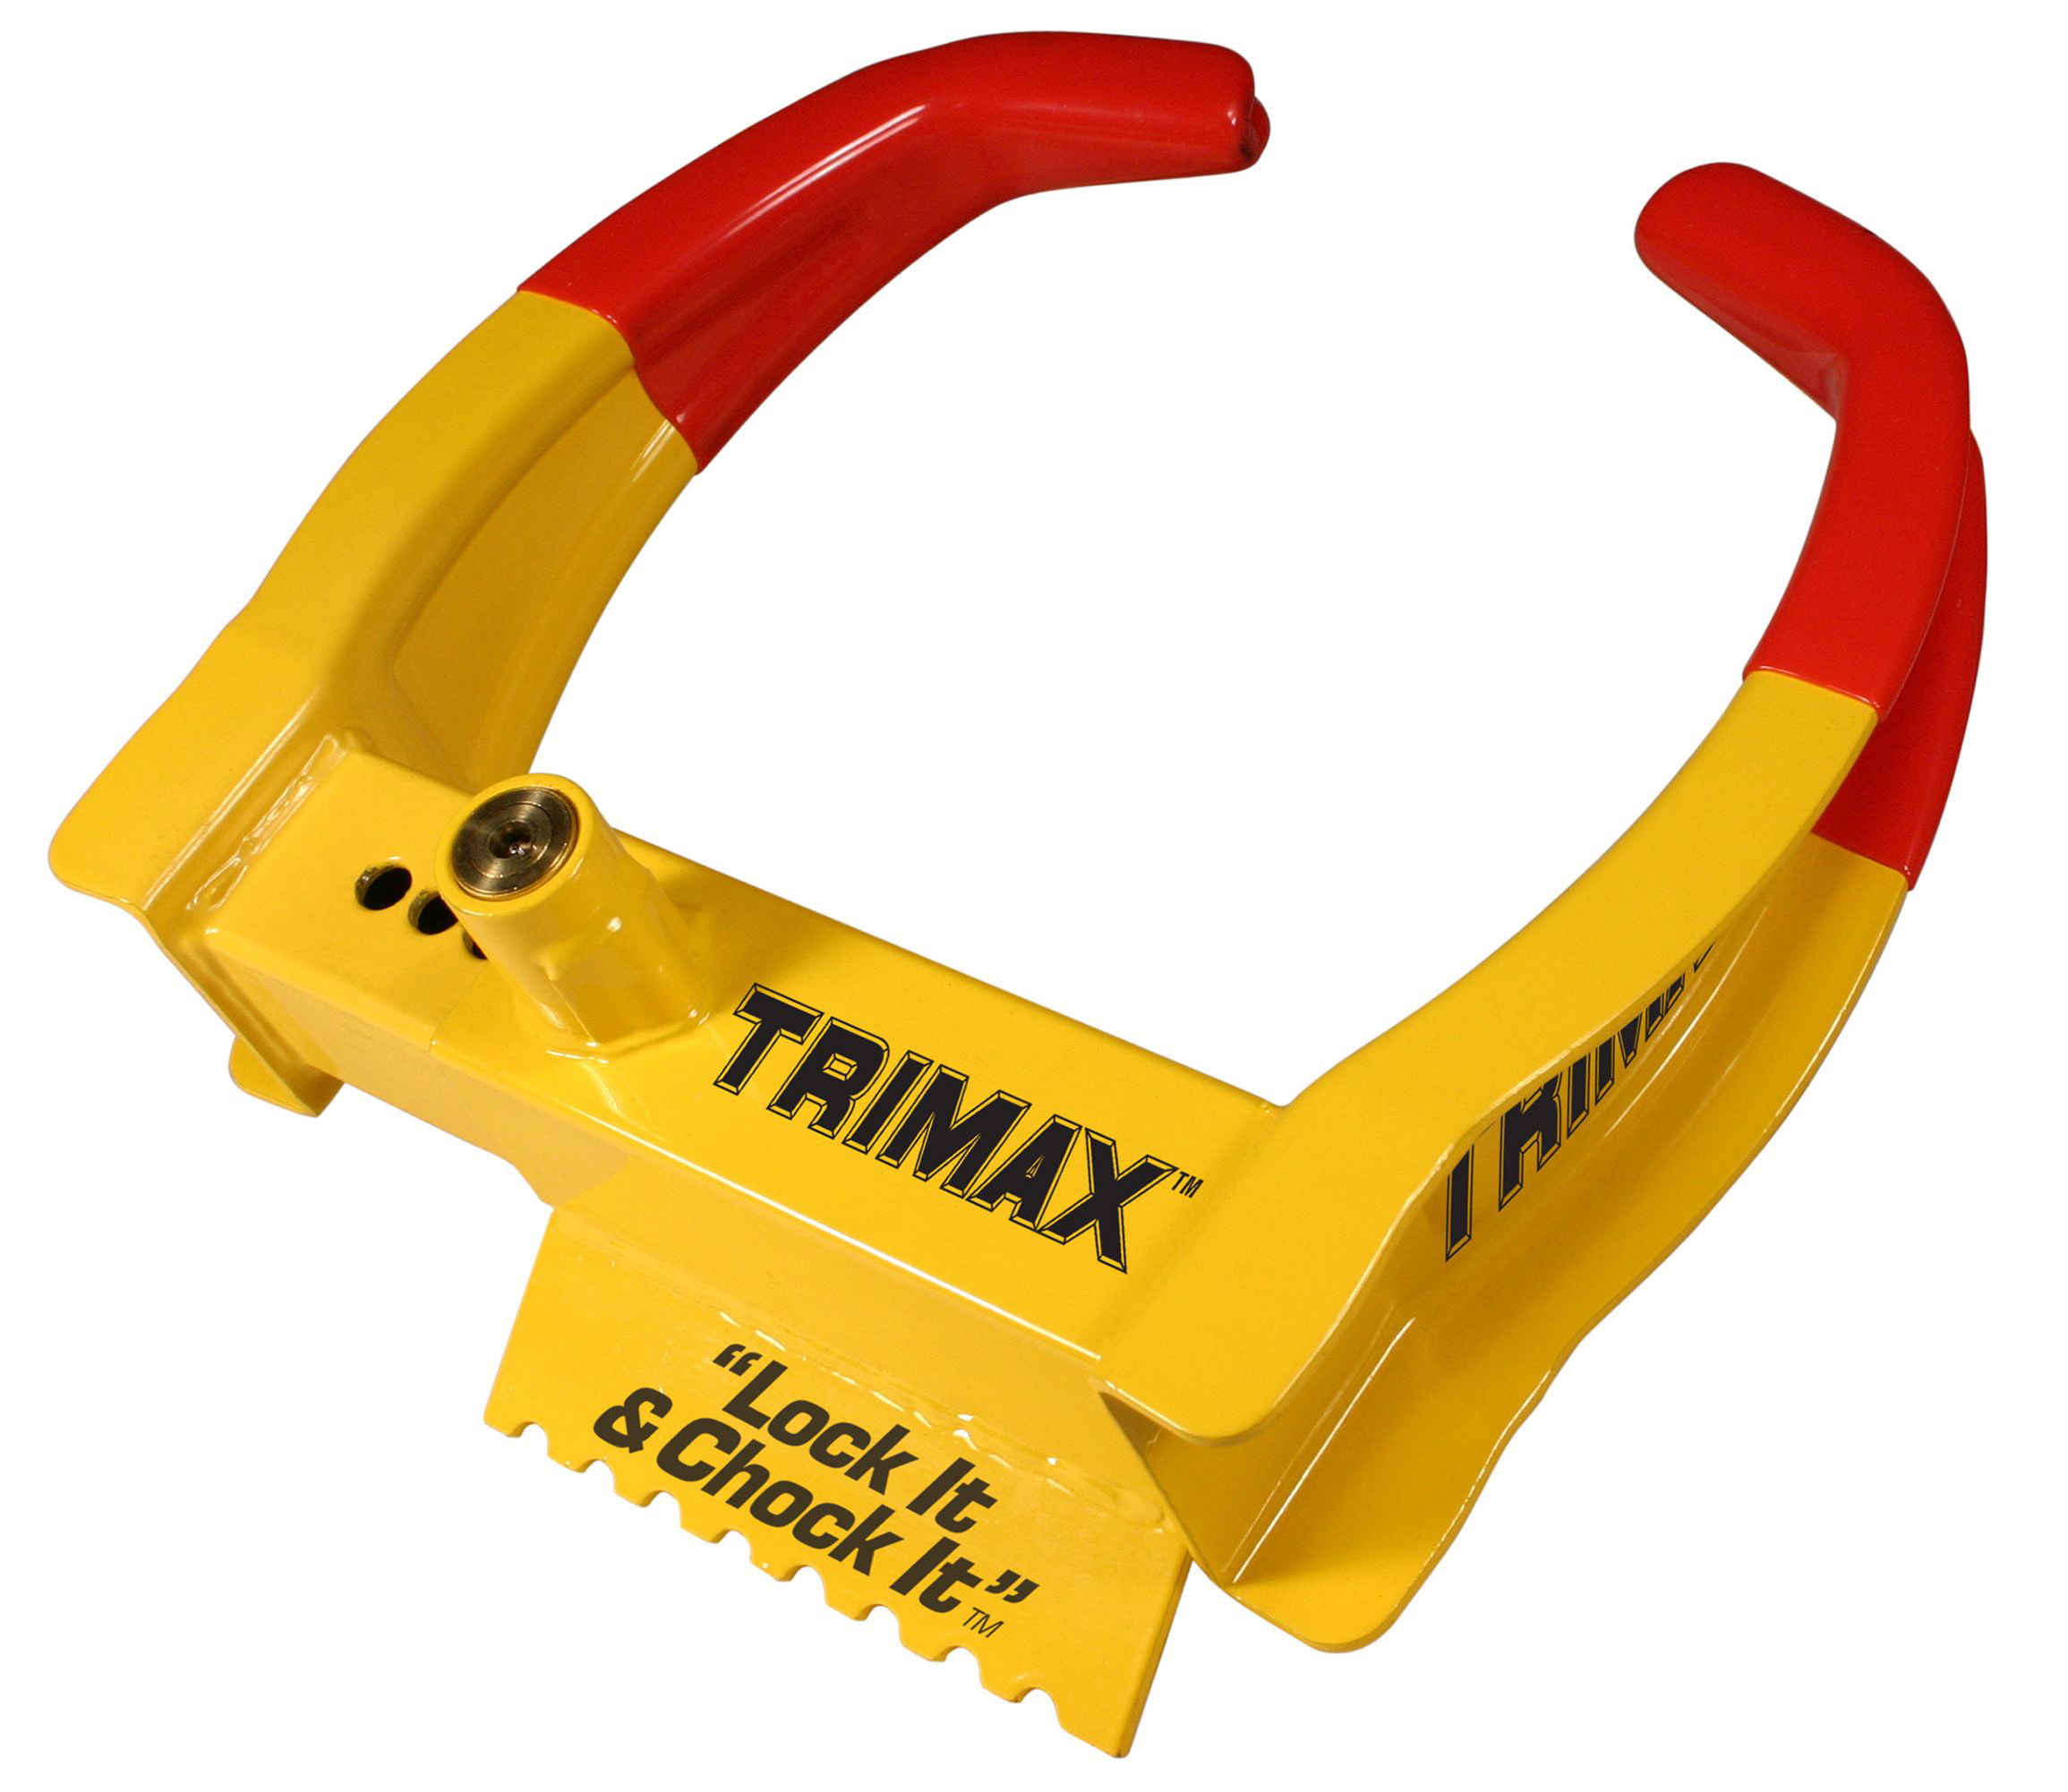 Trimax TNRC126 Trimaflex Coiled Lock - 72in. Cable with Combination Lock